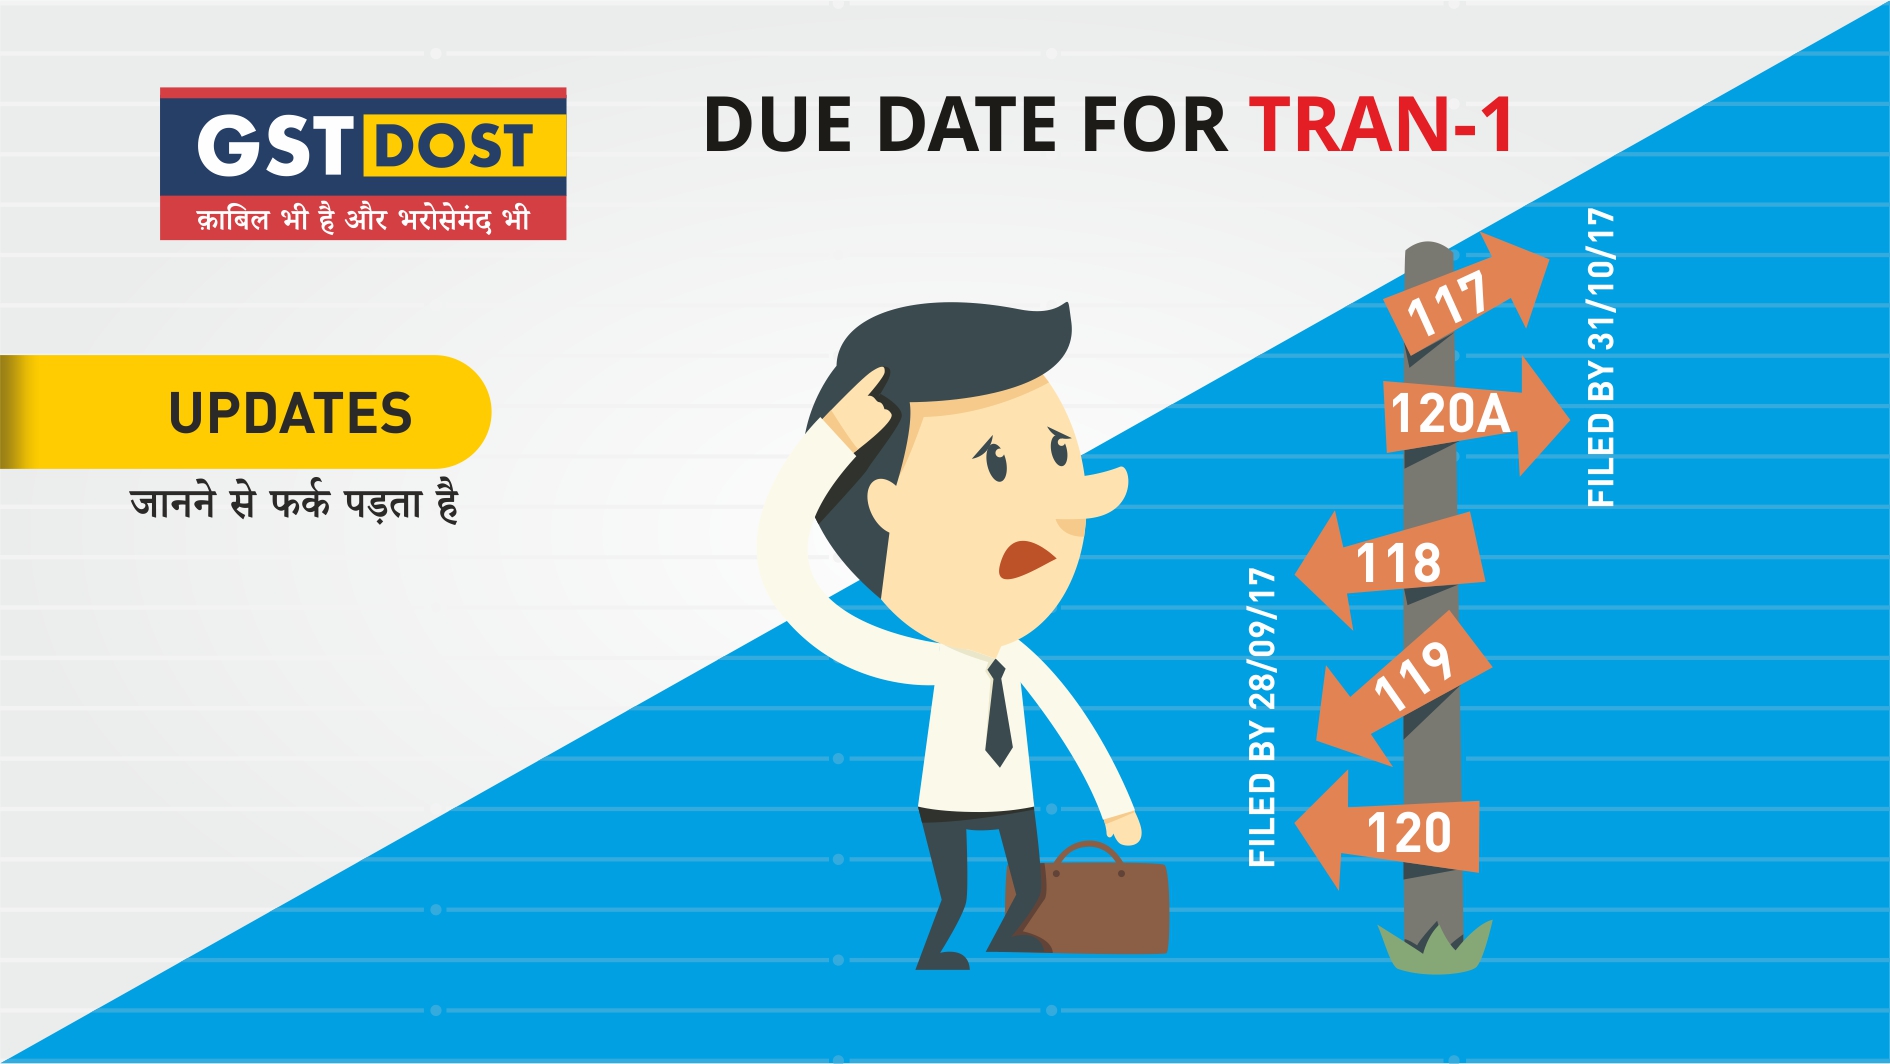 GST TRAN-1 extend due date not for Rule 118, Rule 119 and Rule 120.